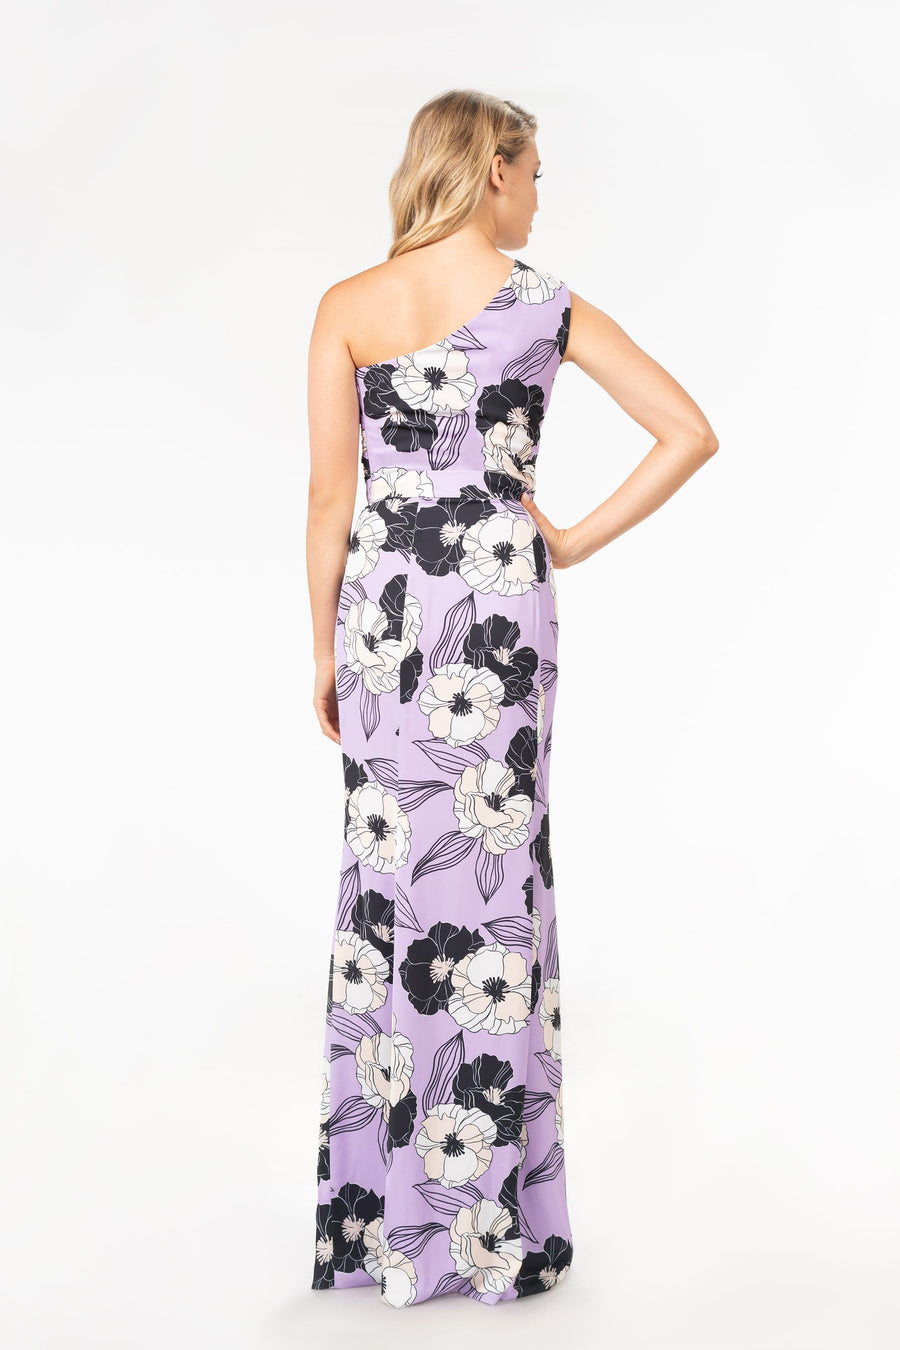 Lei Lei Strappy Dress in Lavender Floral – Island Boutique